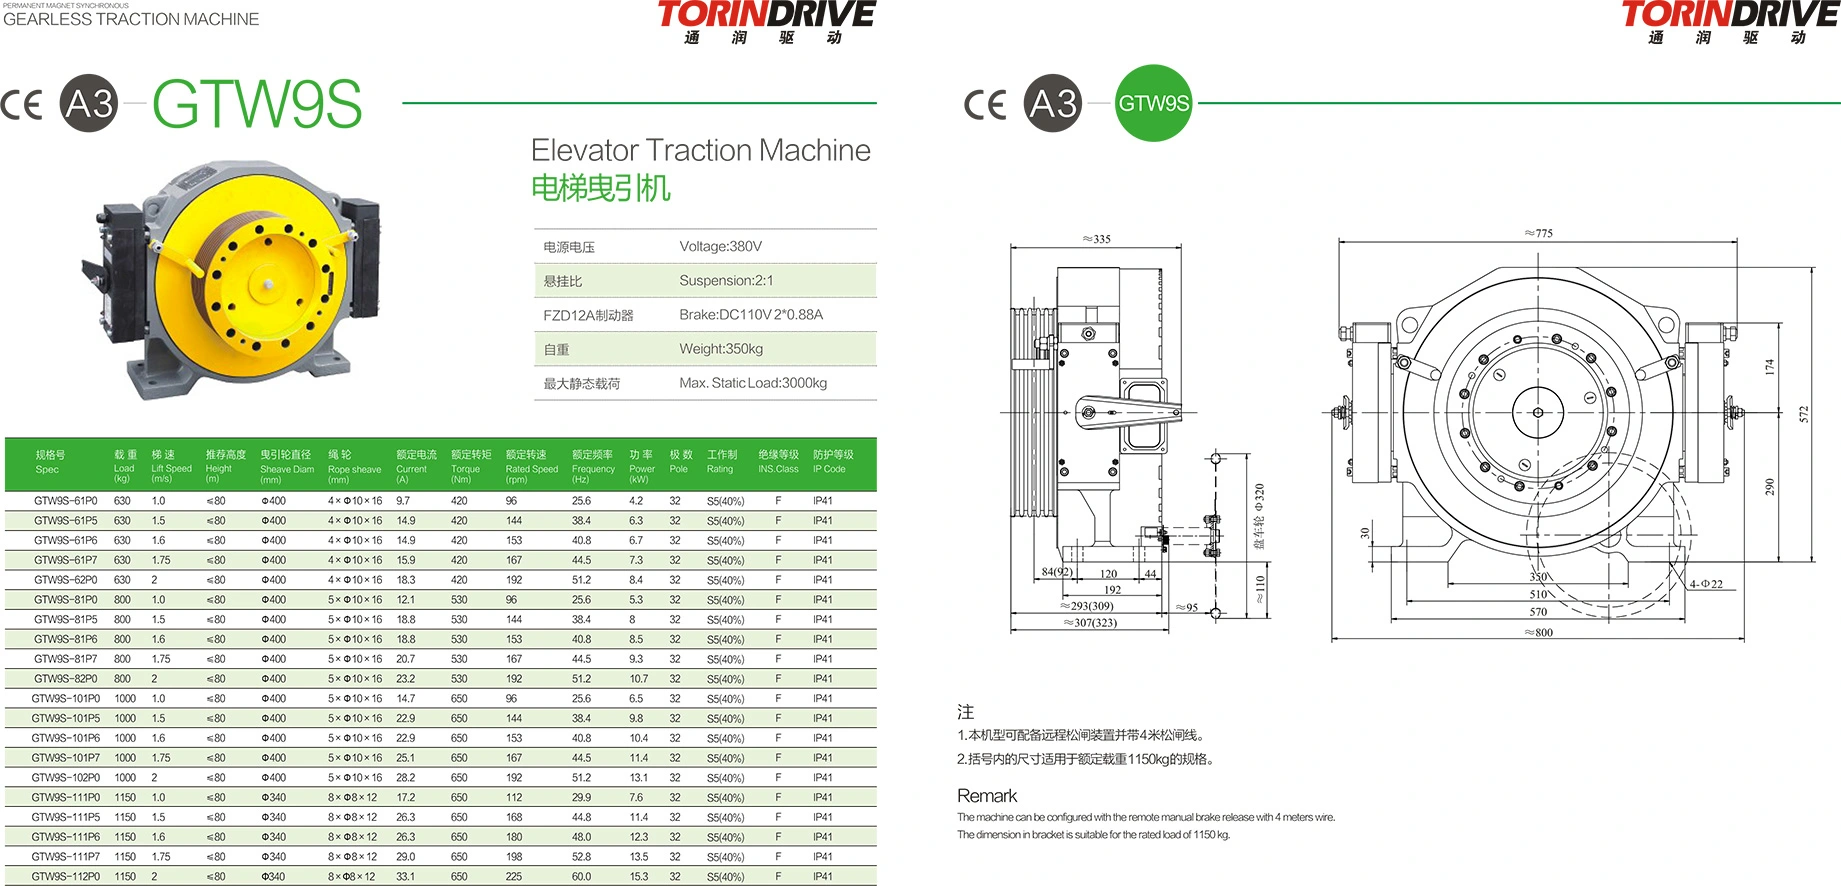 TorinDrive GTW9S   Elevator Traction Machine DETAIL